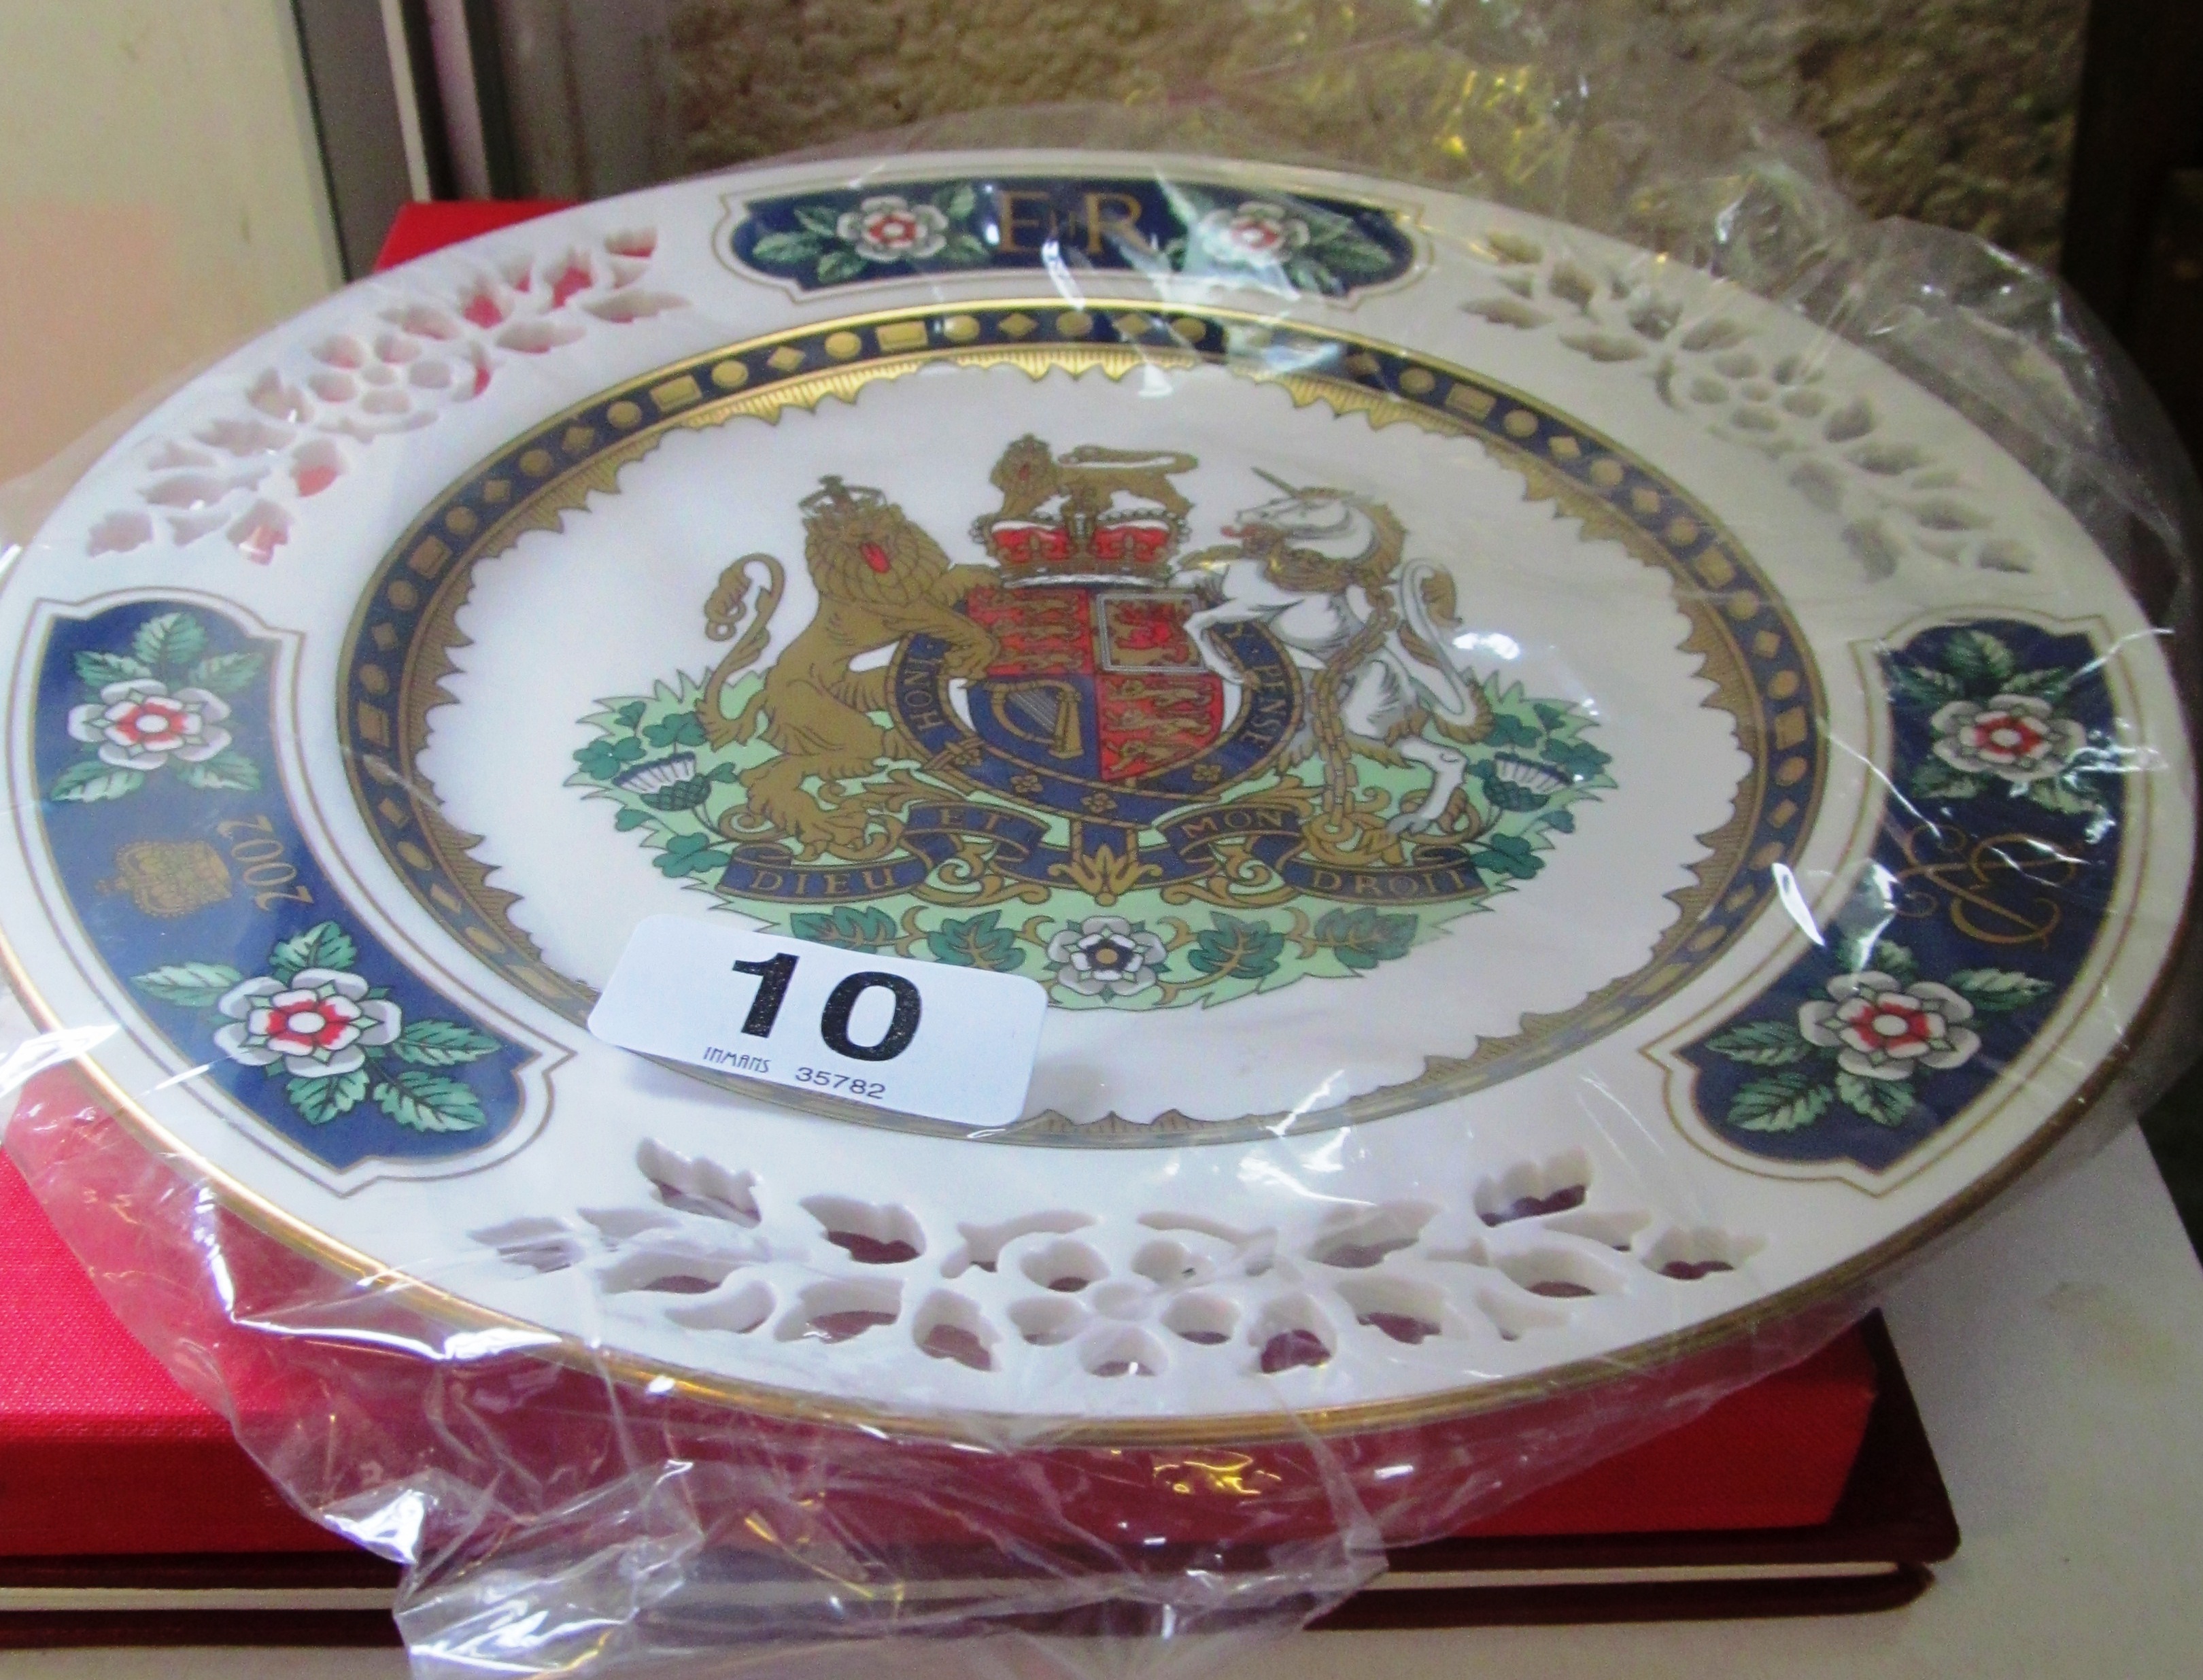 A Spode Queen Elizabeth plate and two commemorative books